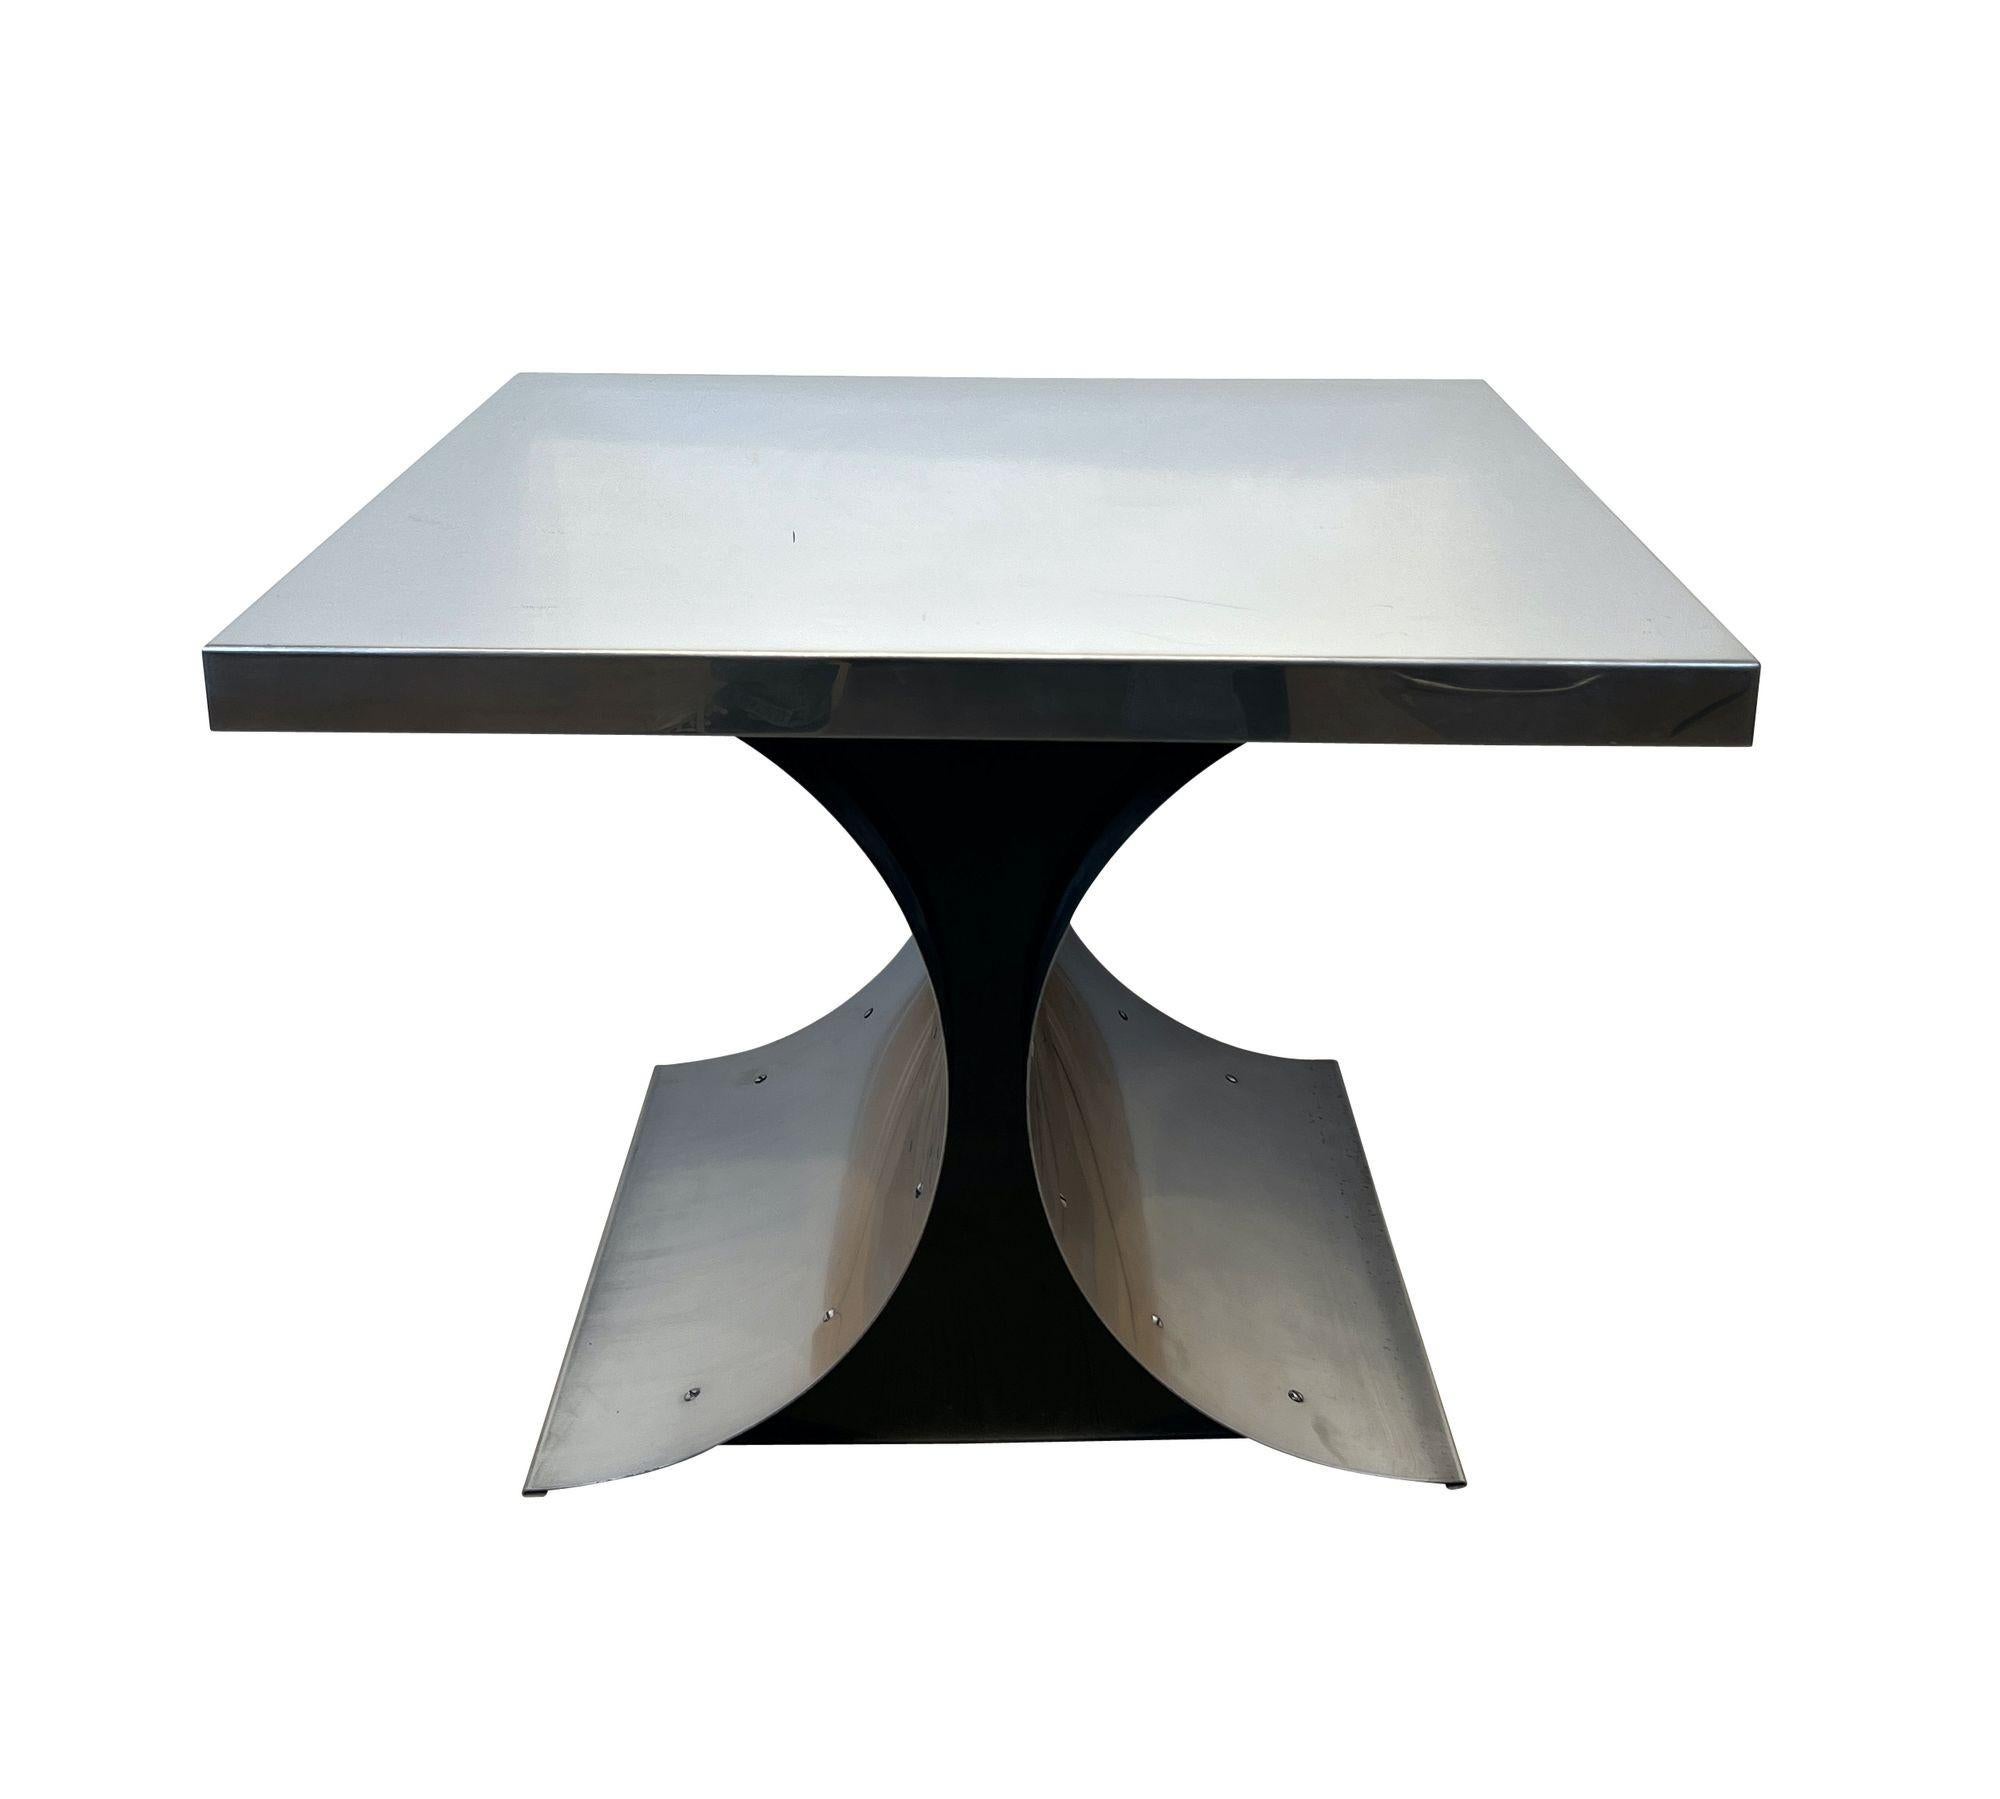 Curved Stainless Steel Sofa, side or Coffee Table in the Style of Oscar Niemeyer from Paris, France about 1960s/70s. Brushed stainless steel frame with black lacquered side parts. Top polished stainless steel and slightly covered with Zappon